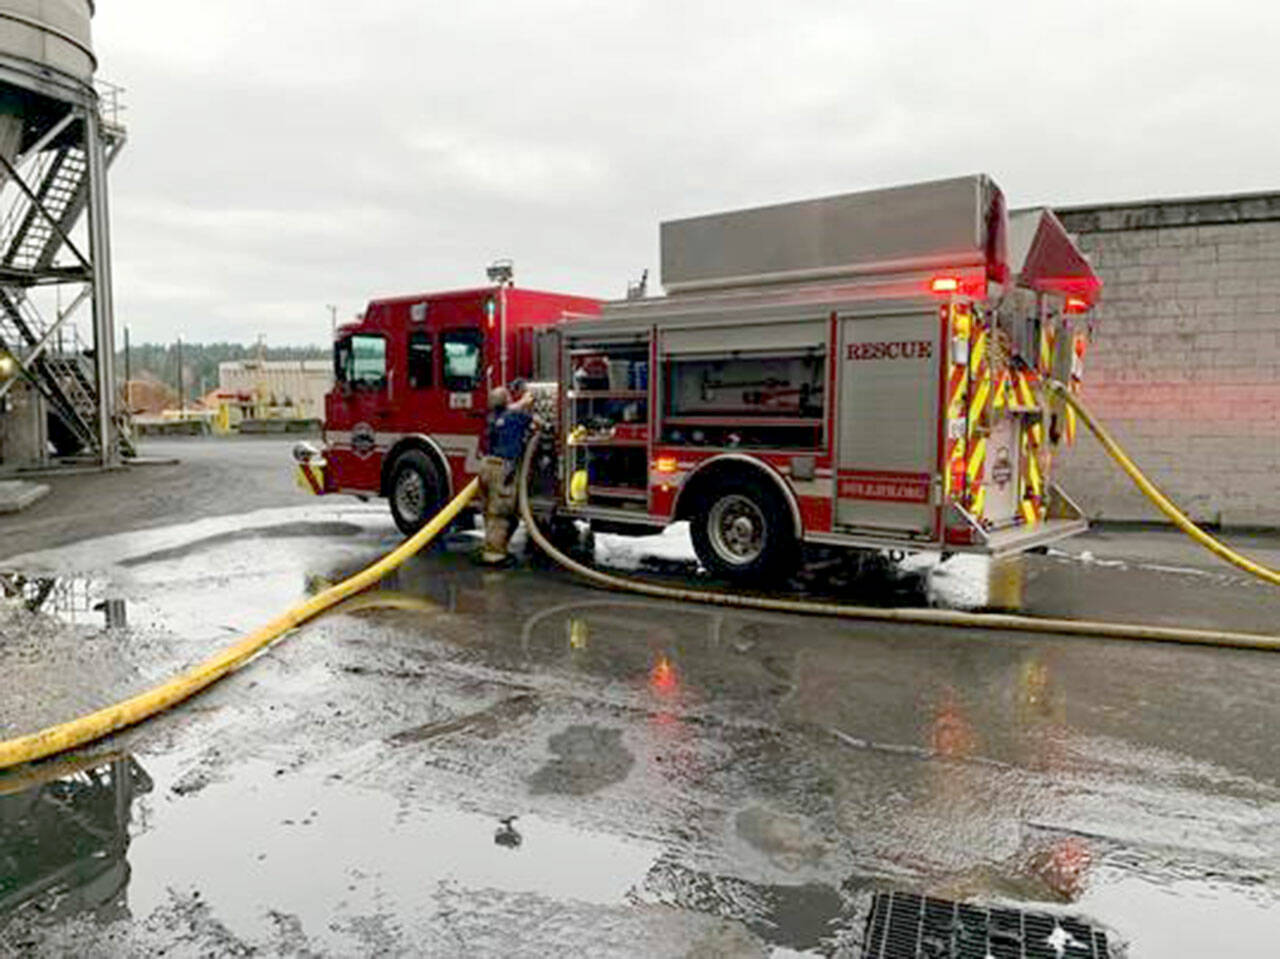 East Jefferson Fire Rescue and Port Ludlow Fire & Rescue firefighters fought a fire at the Port Townsend Paper Mill on Tuesday. (East Jefferson Fire Rescue)